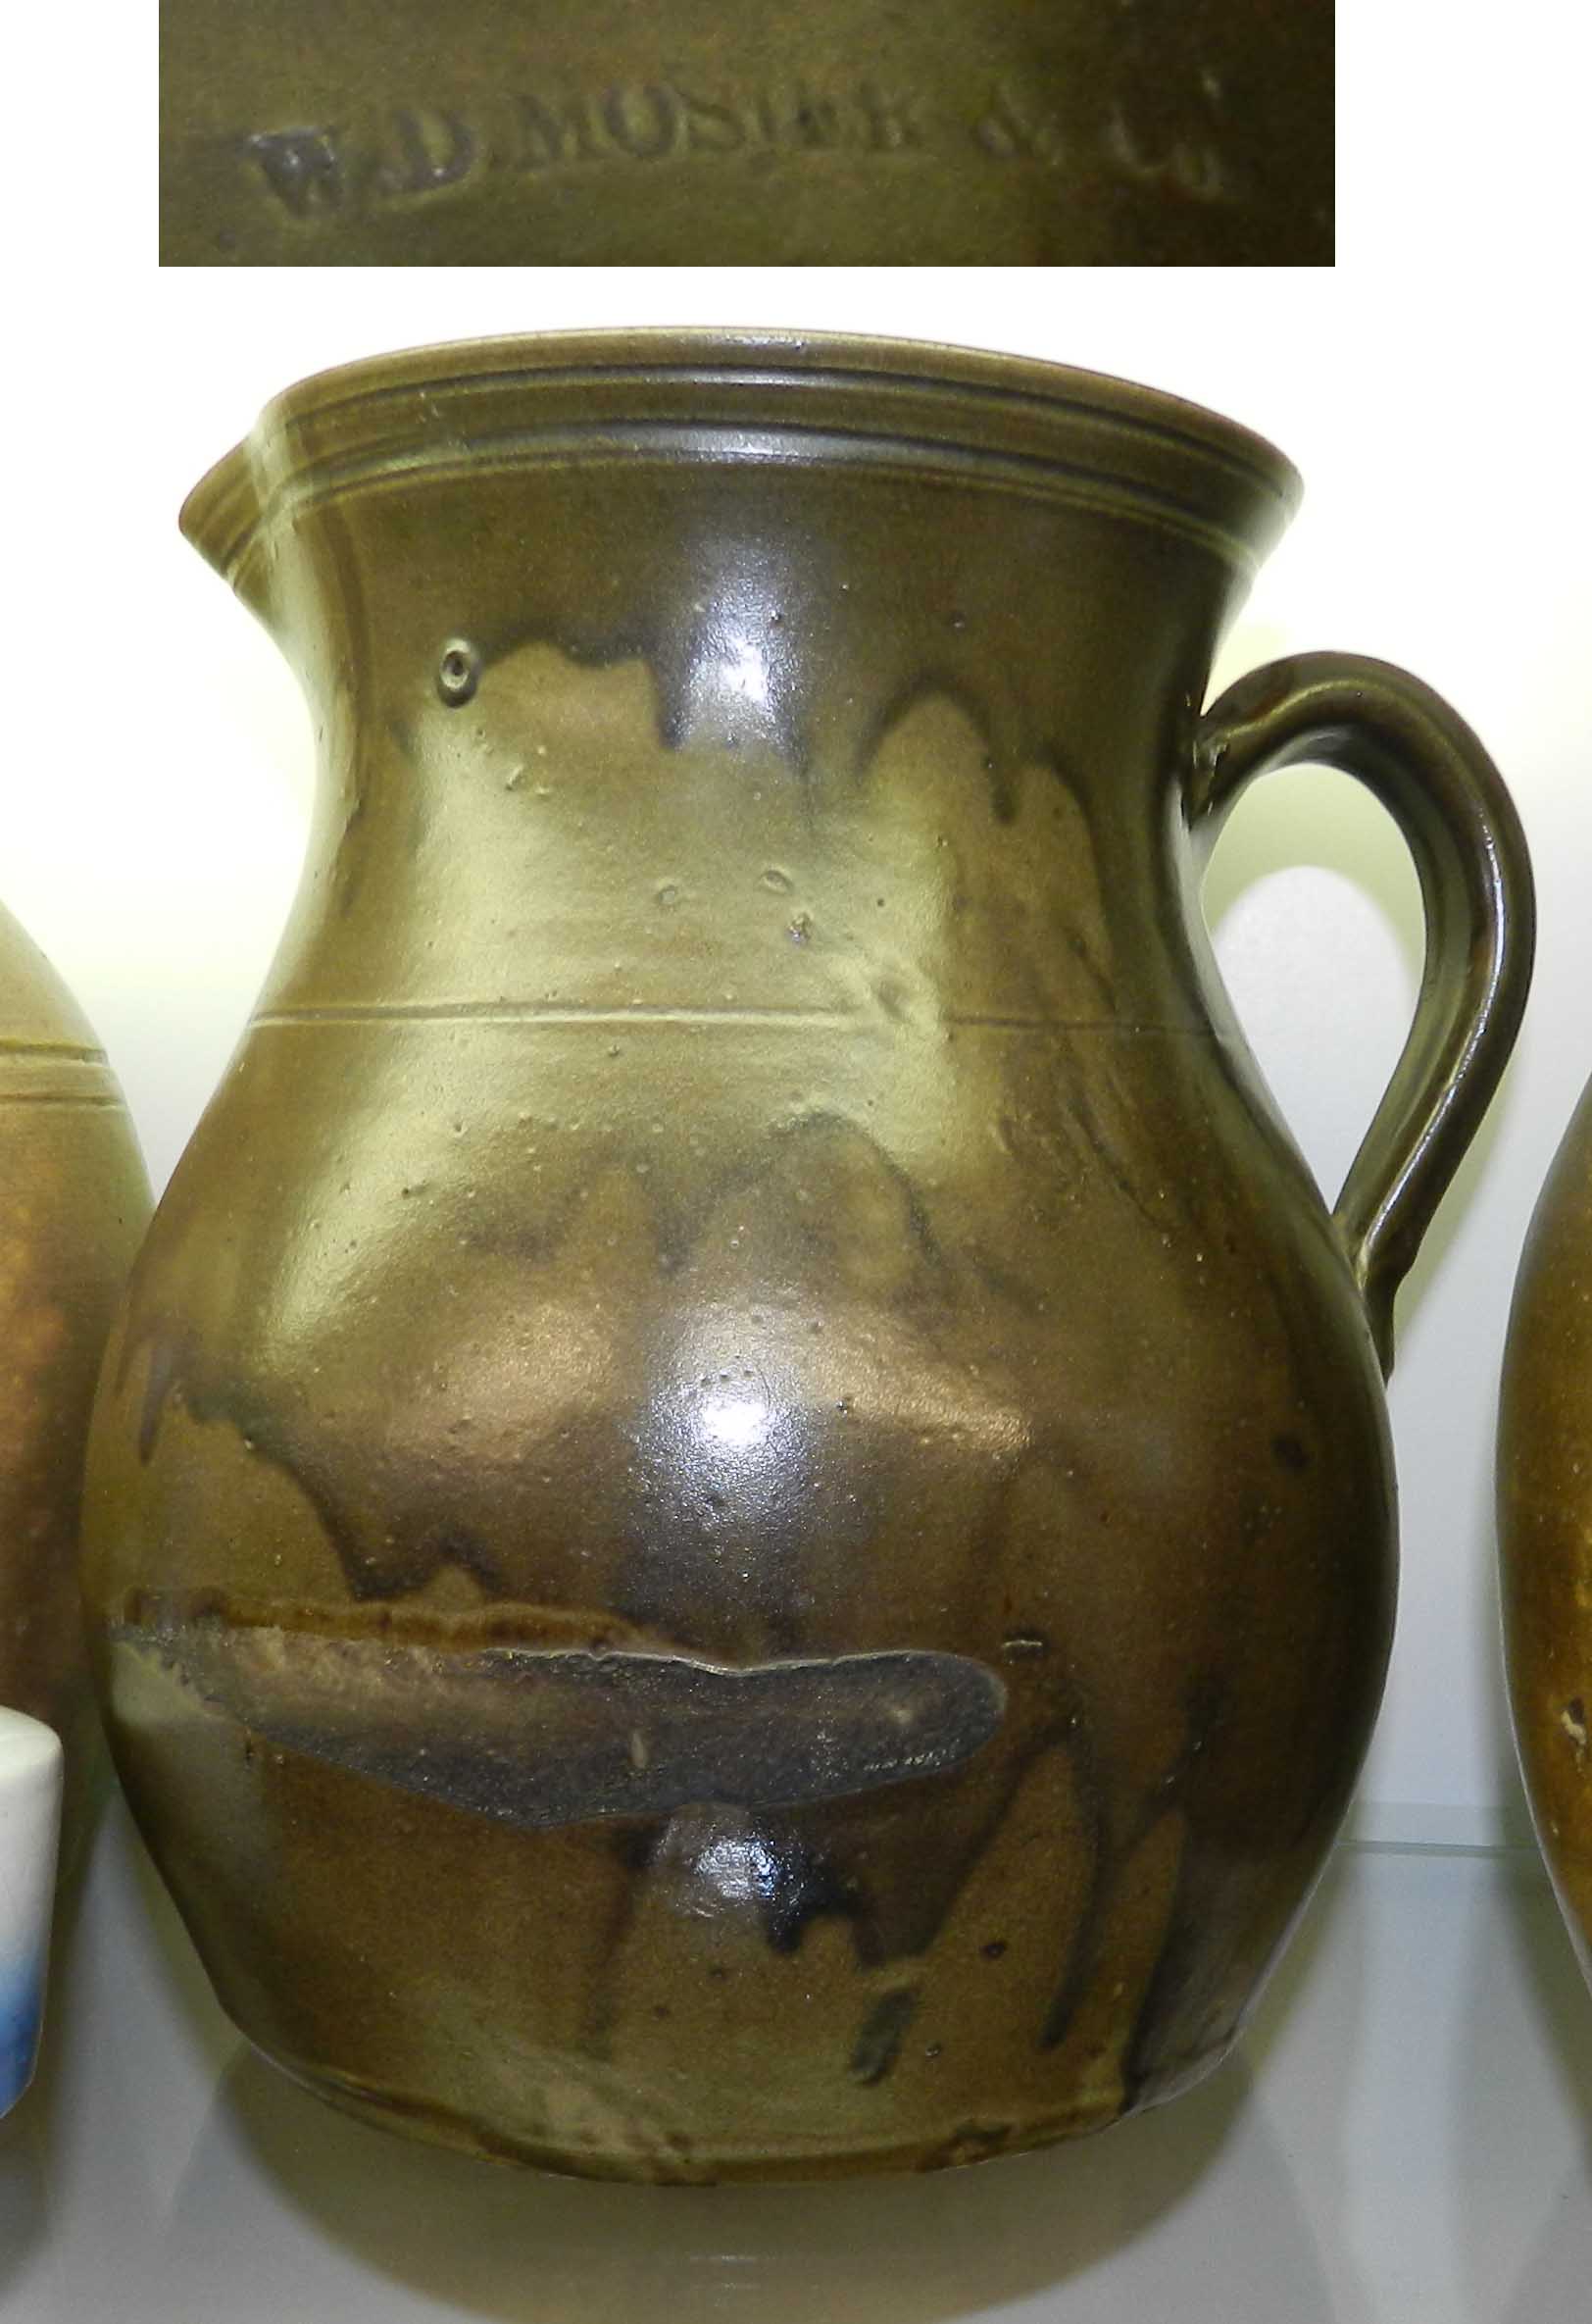 Earthenware pitcher with drippy olive green lead glaze, handle and incised lines around the rim and one ast the shoulder. It is stamped "W.D. MOSIER &CO." below the pouring spout. Private collection.